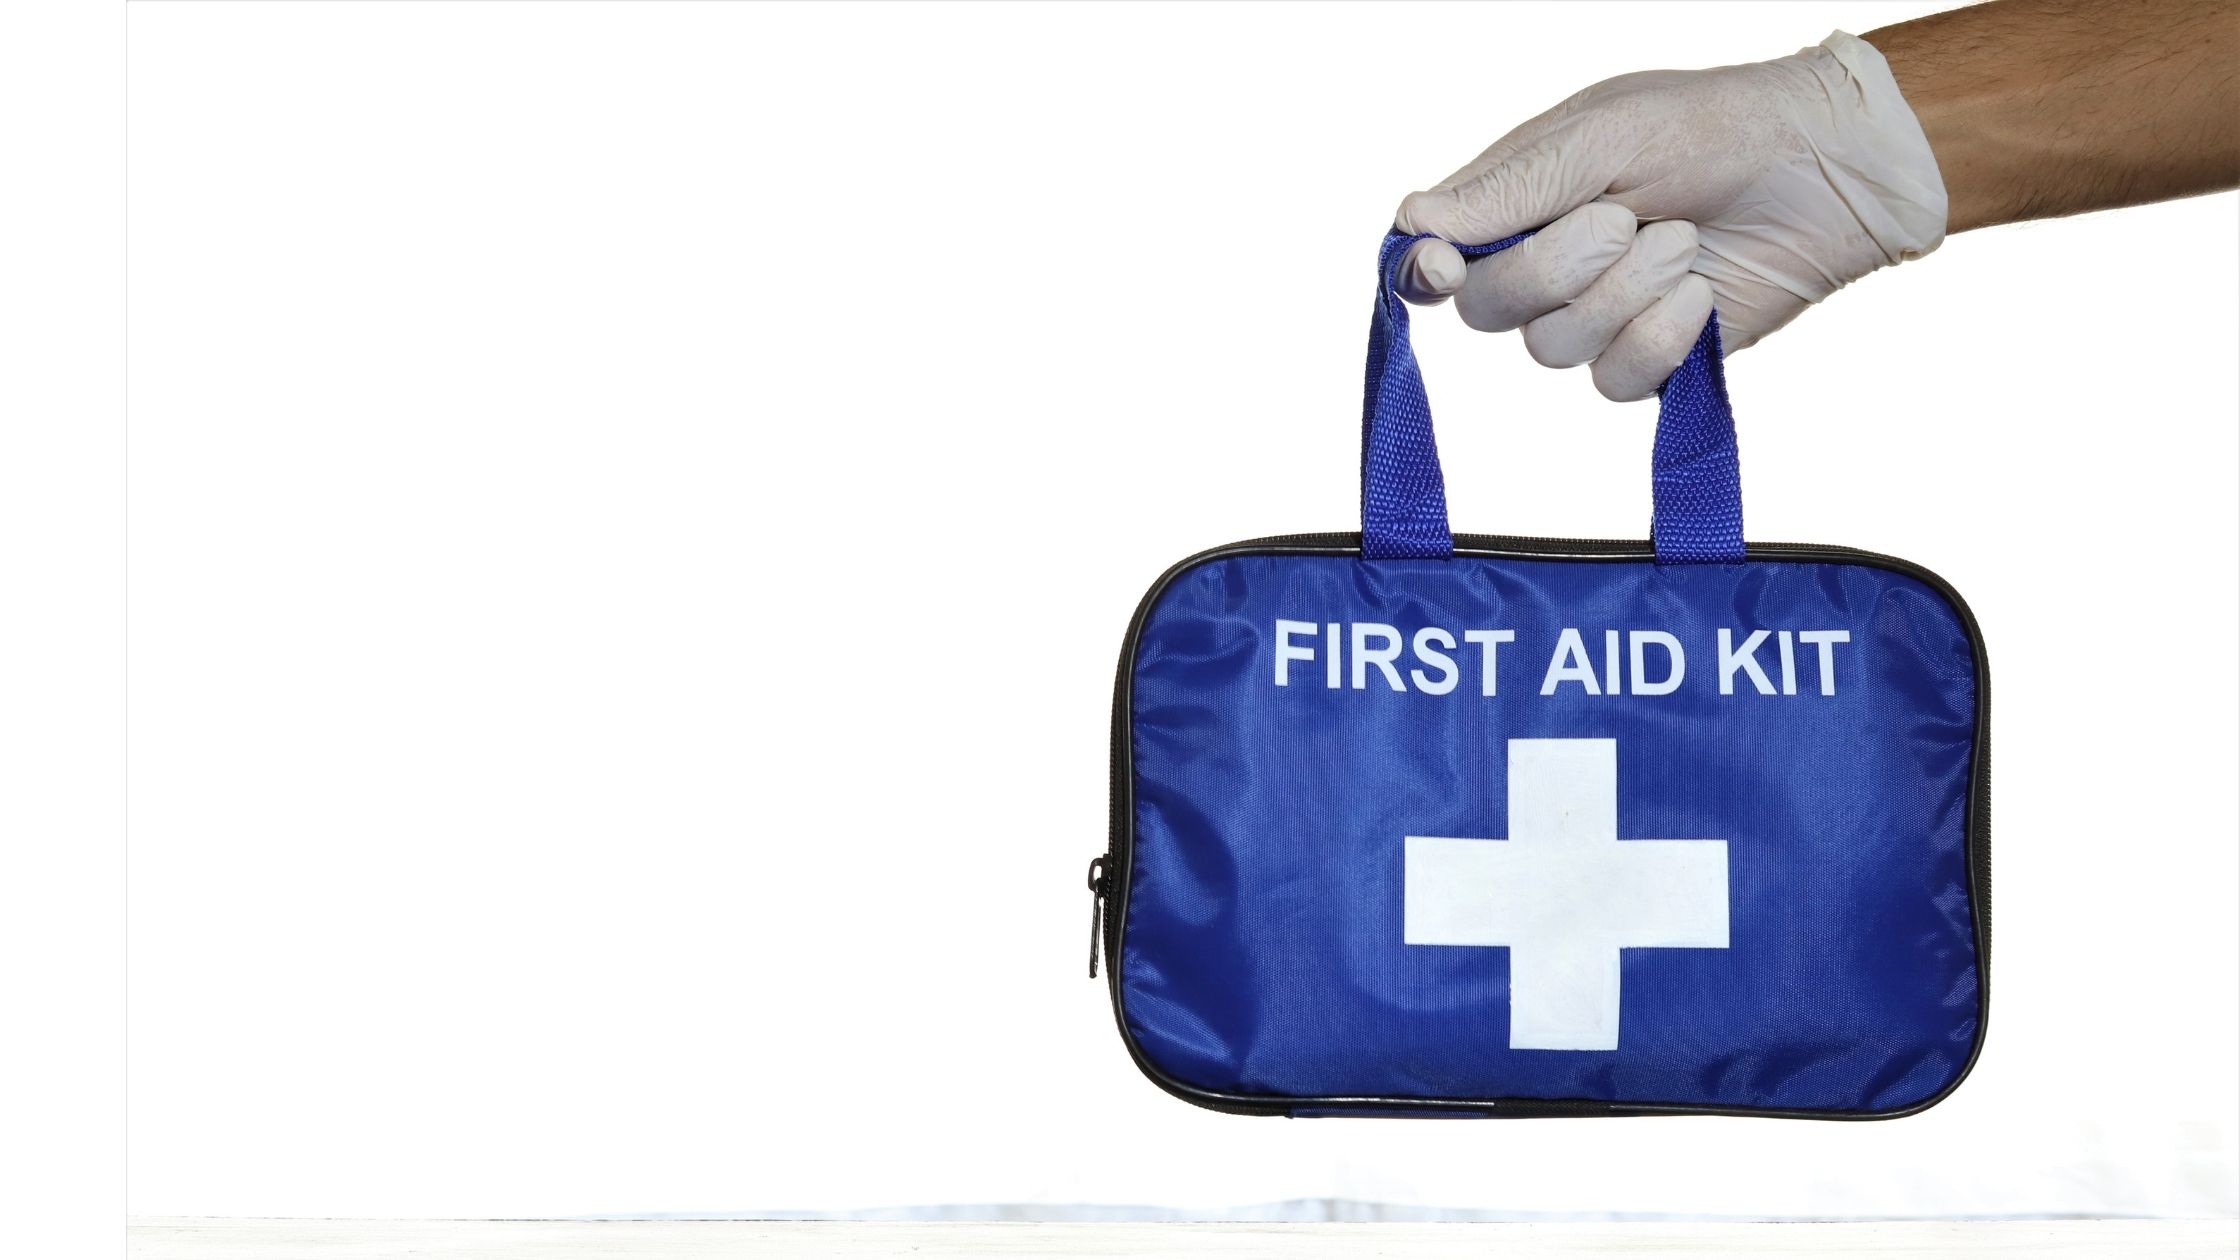 basic first aid kit consists of 15 items